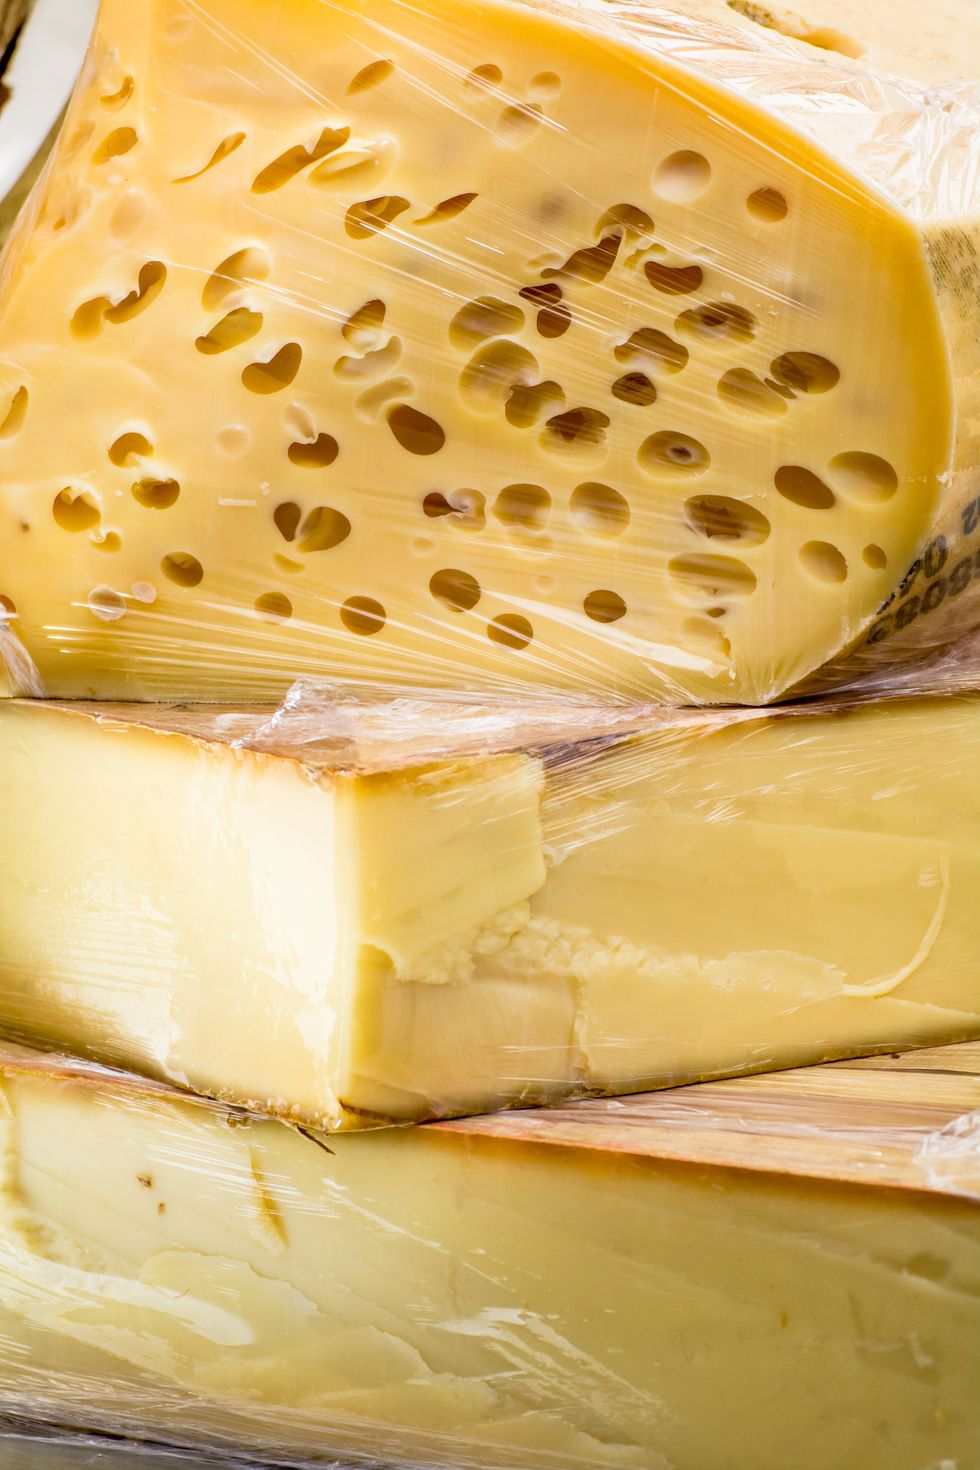 Food, Ingredient, Cheese, Dairy, Cuisine, Parmigiano-reggiano, Processed cheese, Sheep milk cheese, Limburger cheese, Snack, 